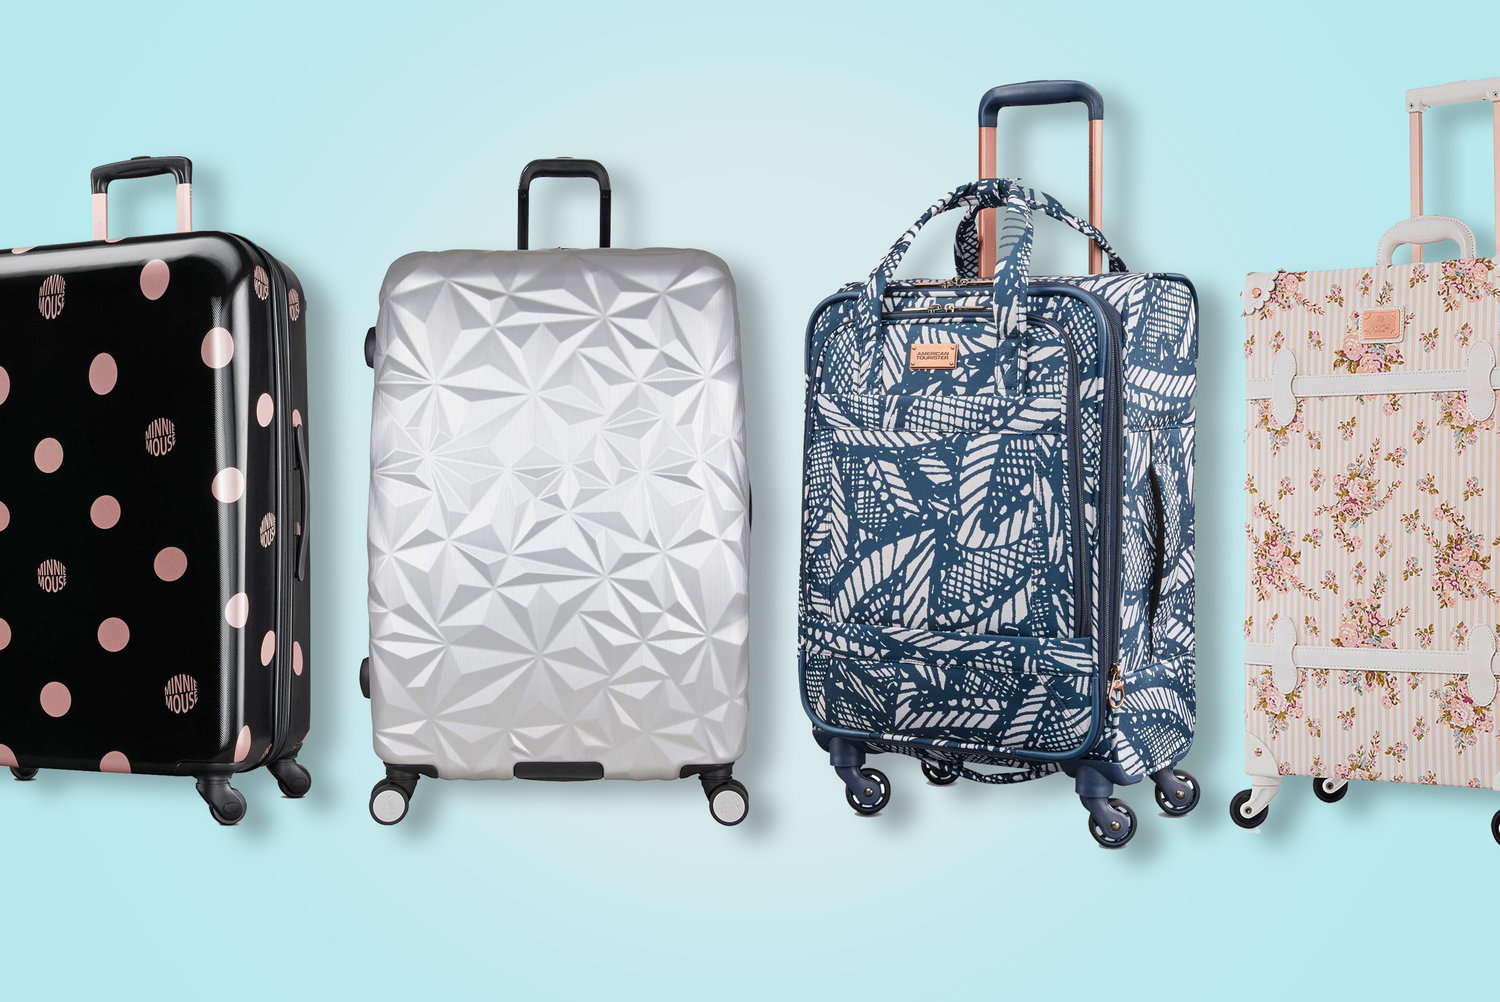 These Cute Suitcases For Teens will Upgrade Any Travel Style | Backpackies